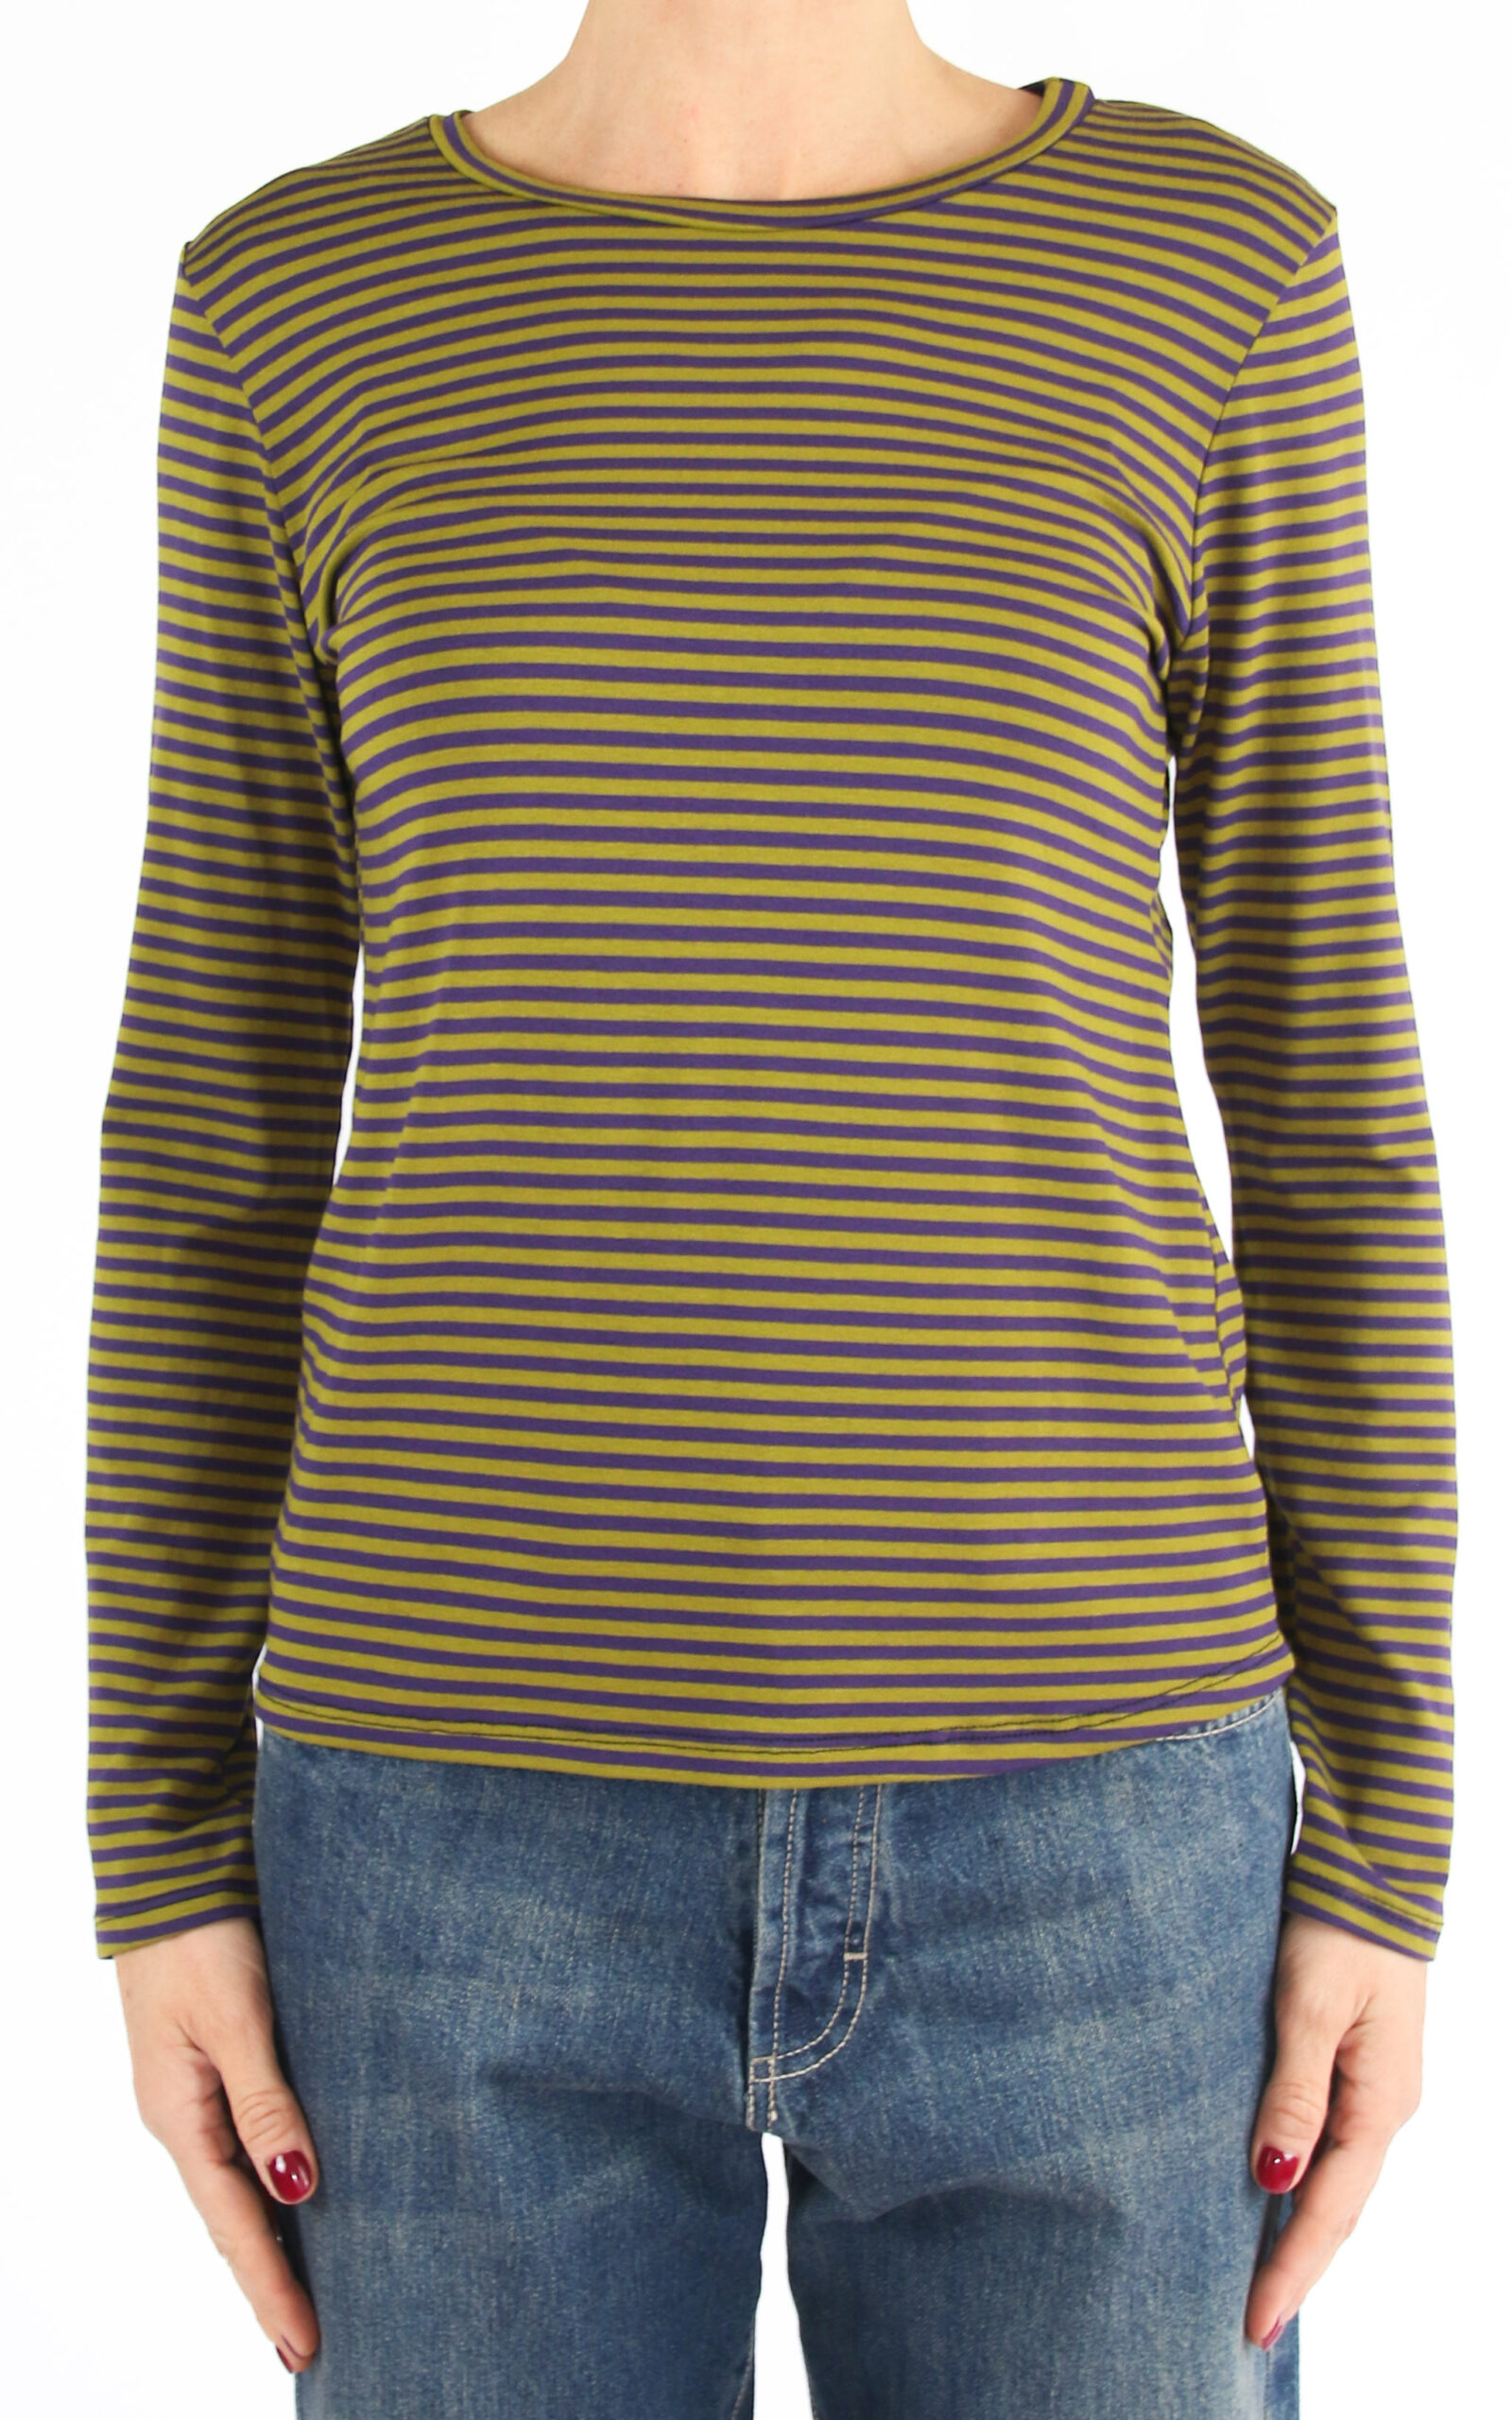 Off-On - t-shirt slim a righe - viola/verde lime